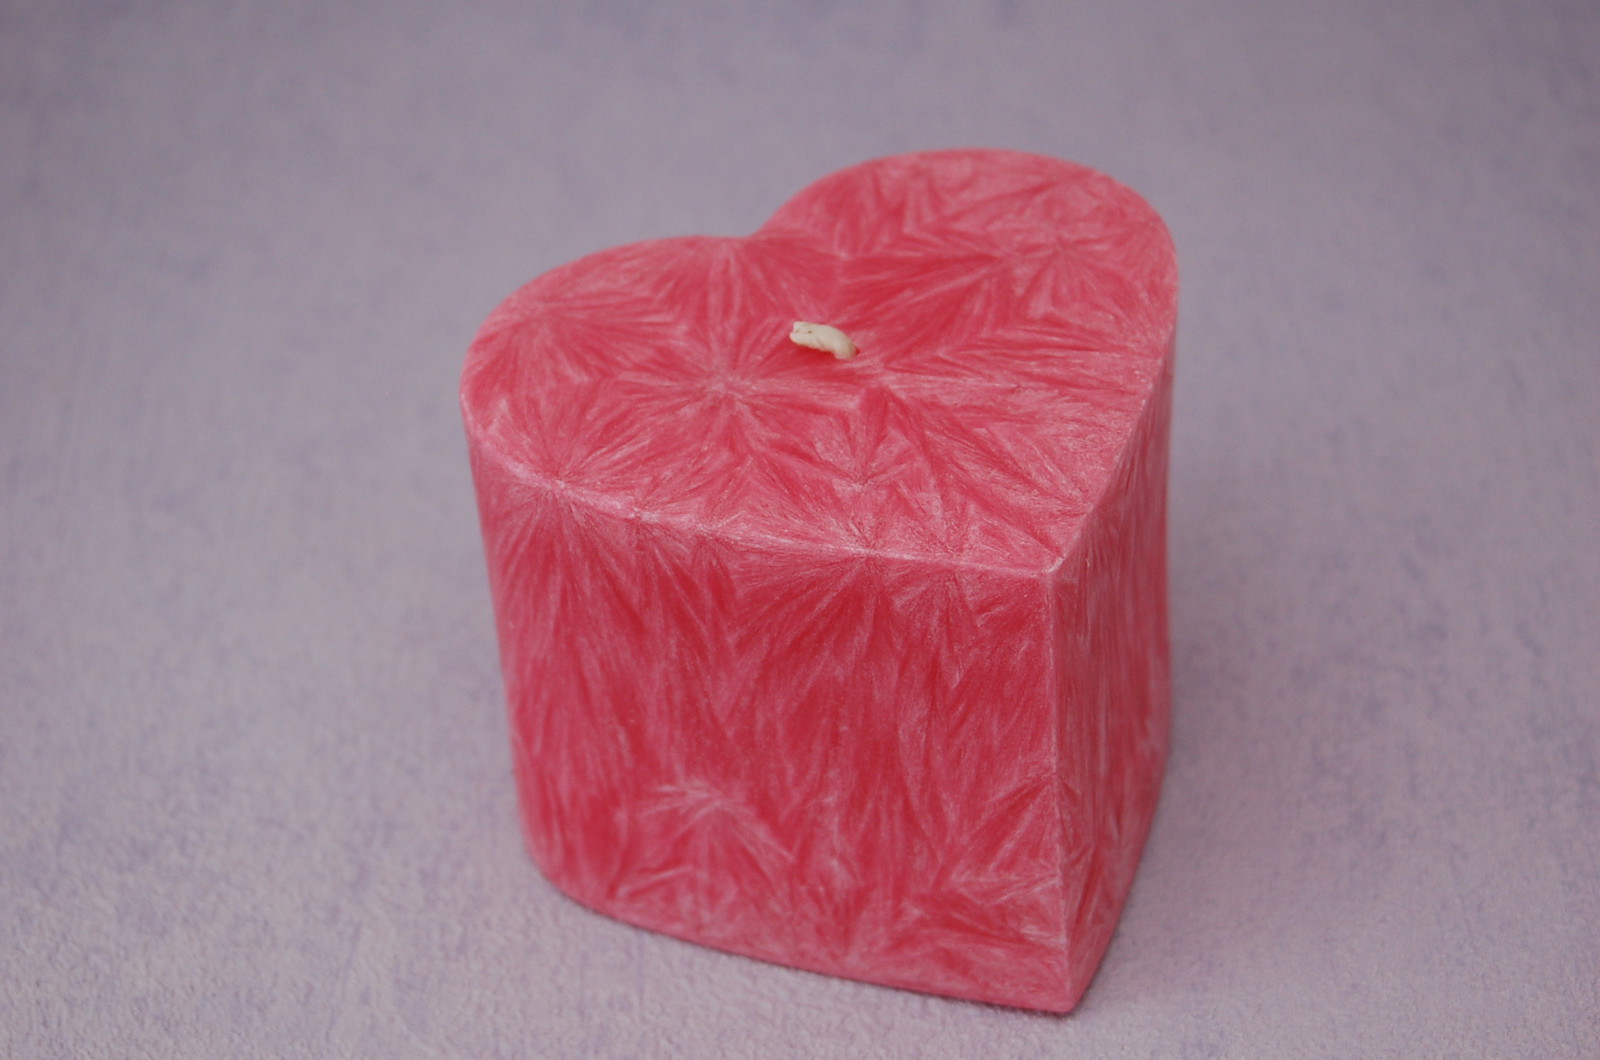 Romantic Pink large heart candle, Blush Fragrance image 1